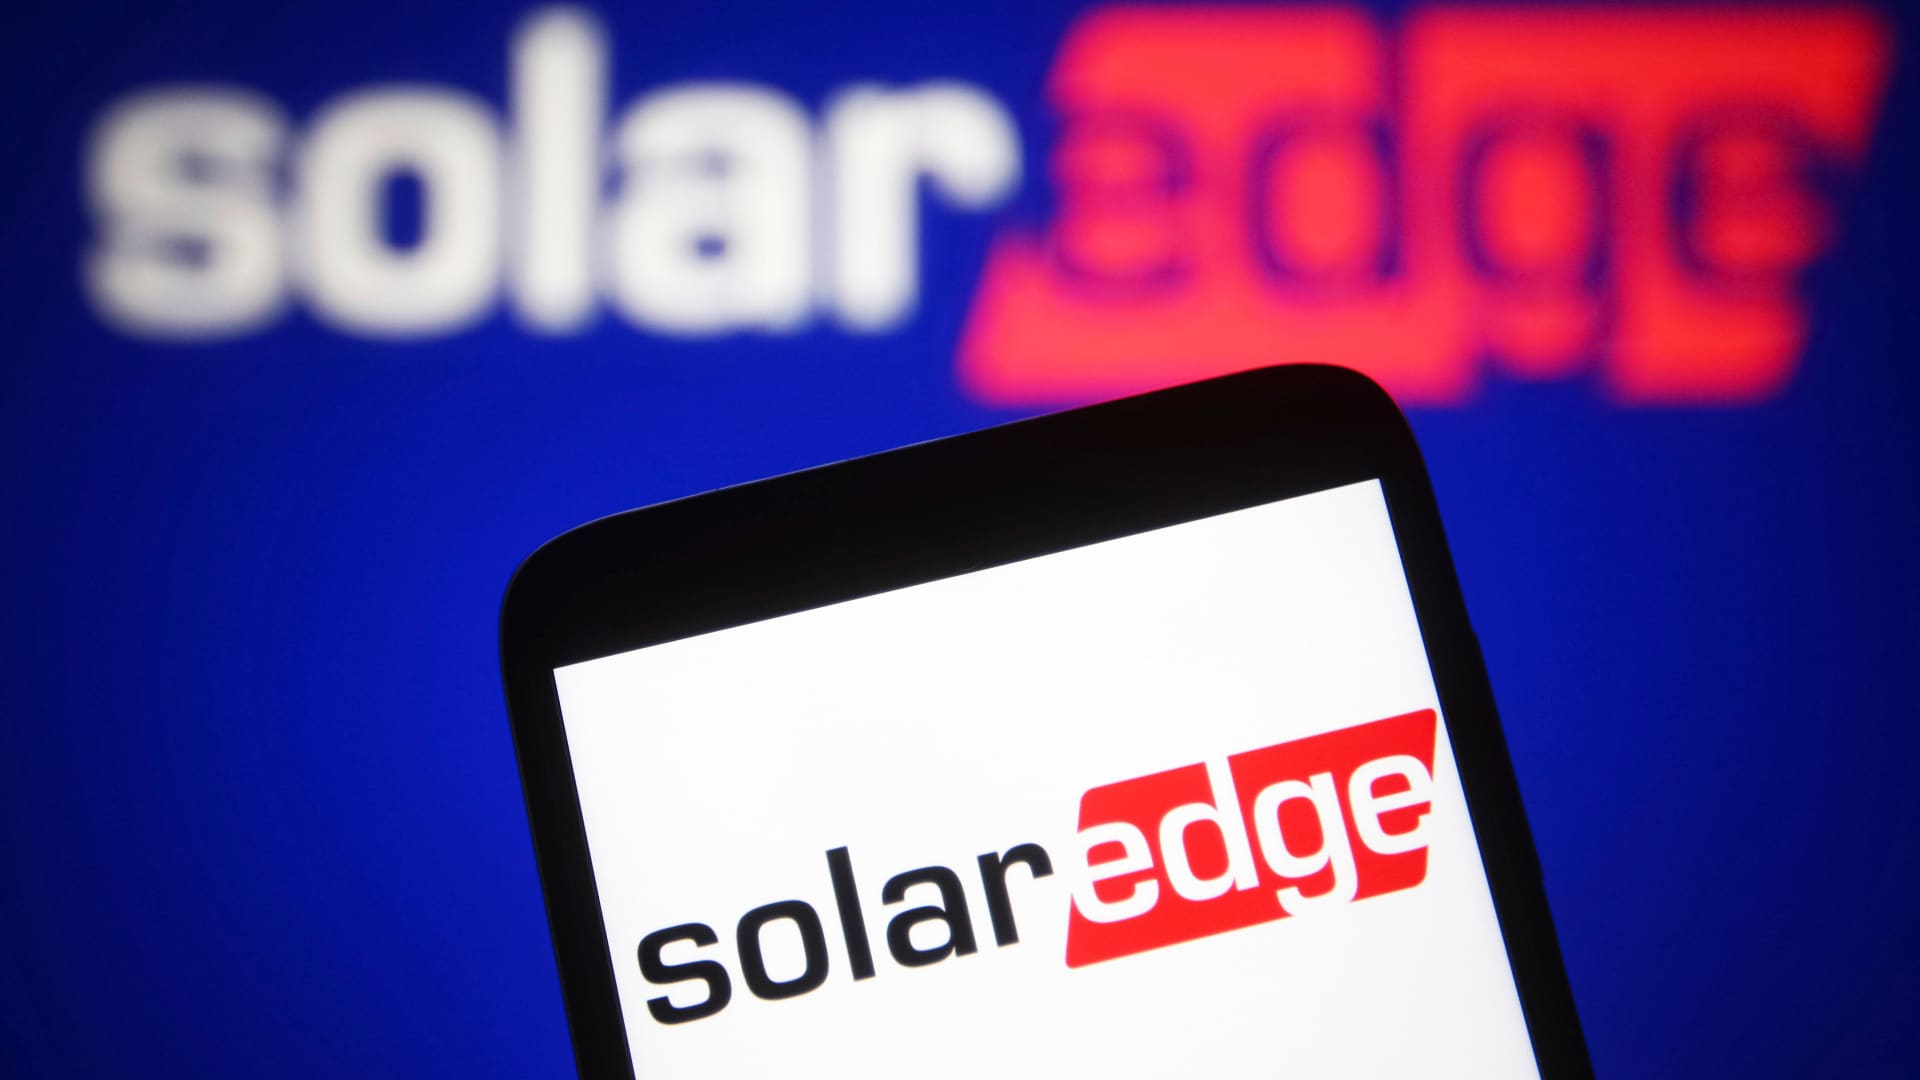 SolarEdge shares sink after company offers weak Q4 guidance